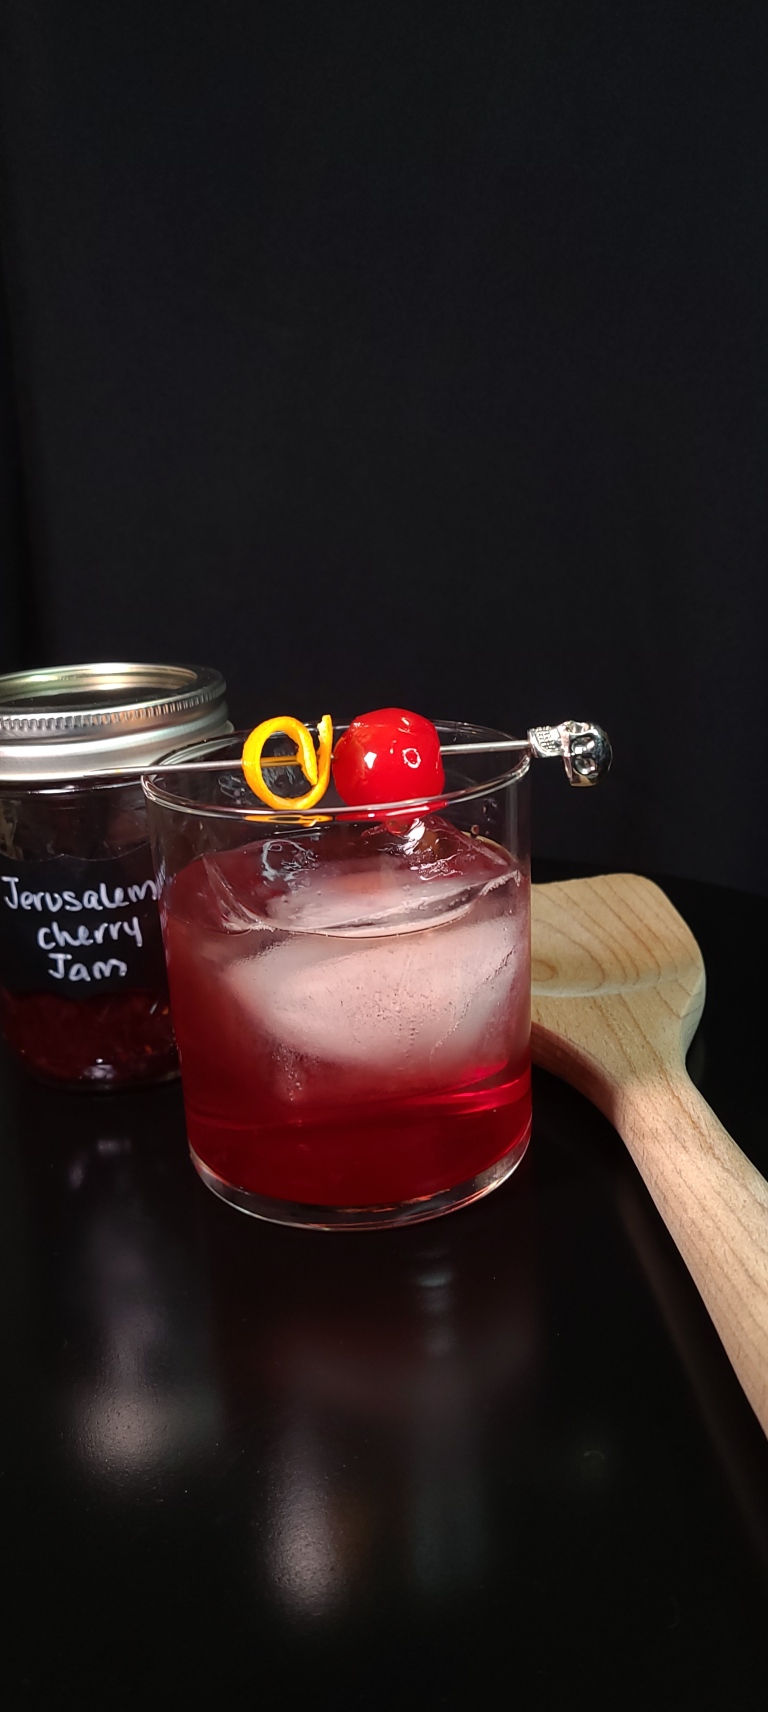 The Old Fashioned Gratitude cocktail sits on a black table with a wooden spoon and a jar labeled "Jerusalem Cherry Jam". The drink is red and garnished with a maraschino cherry and orange peel.